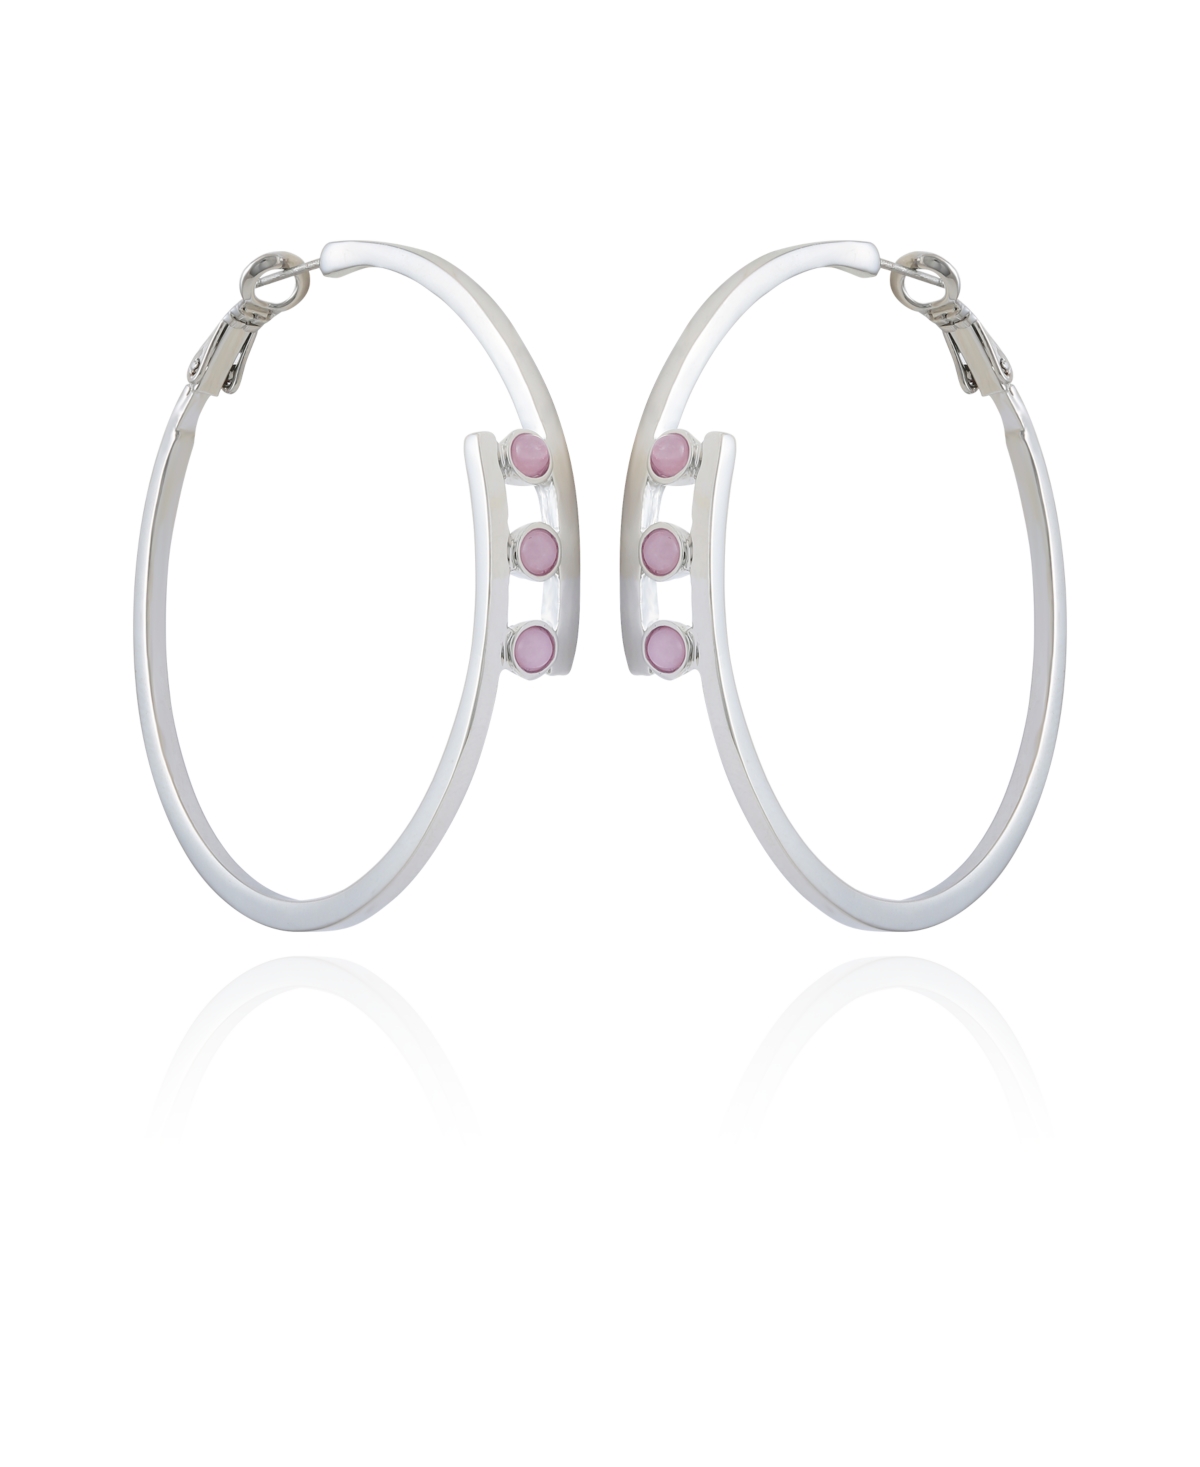 Silver-Tone and Crystal 3 Stone Hoop Earring - Silver-Tone, Crystal